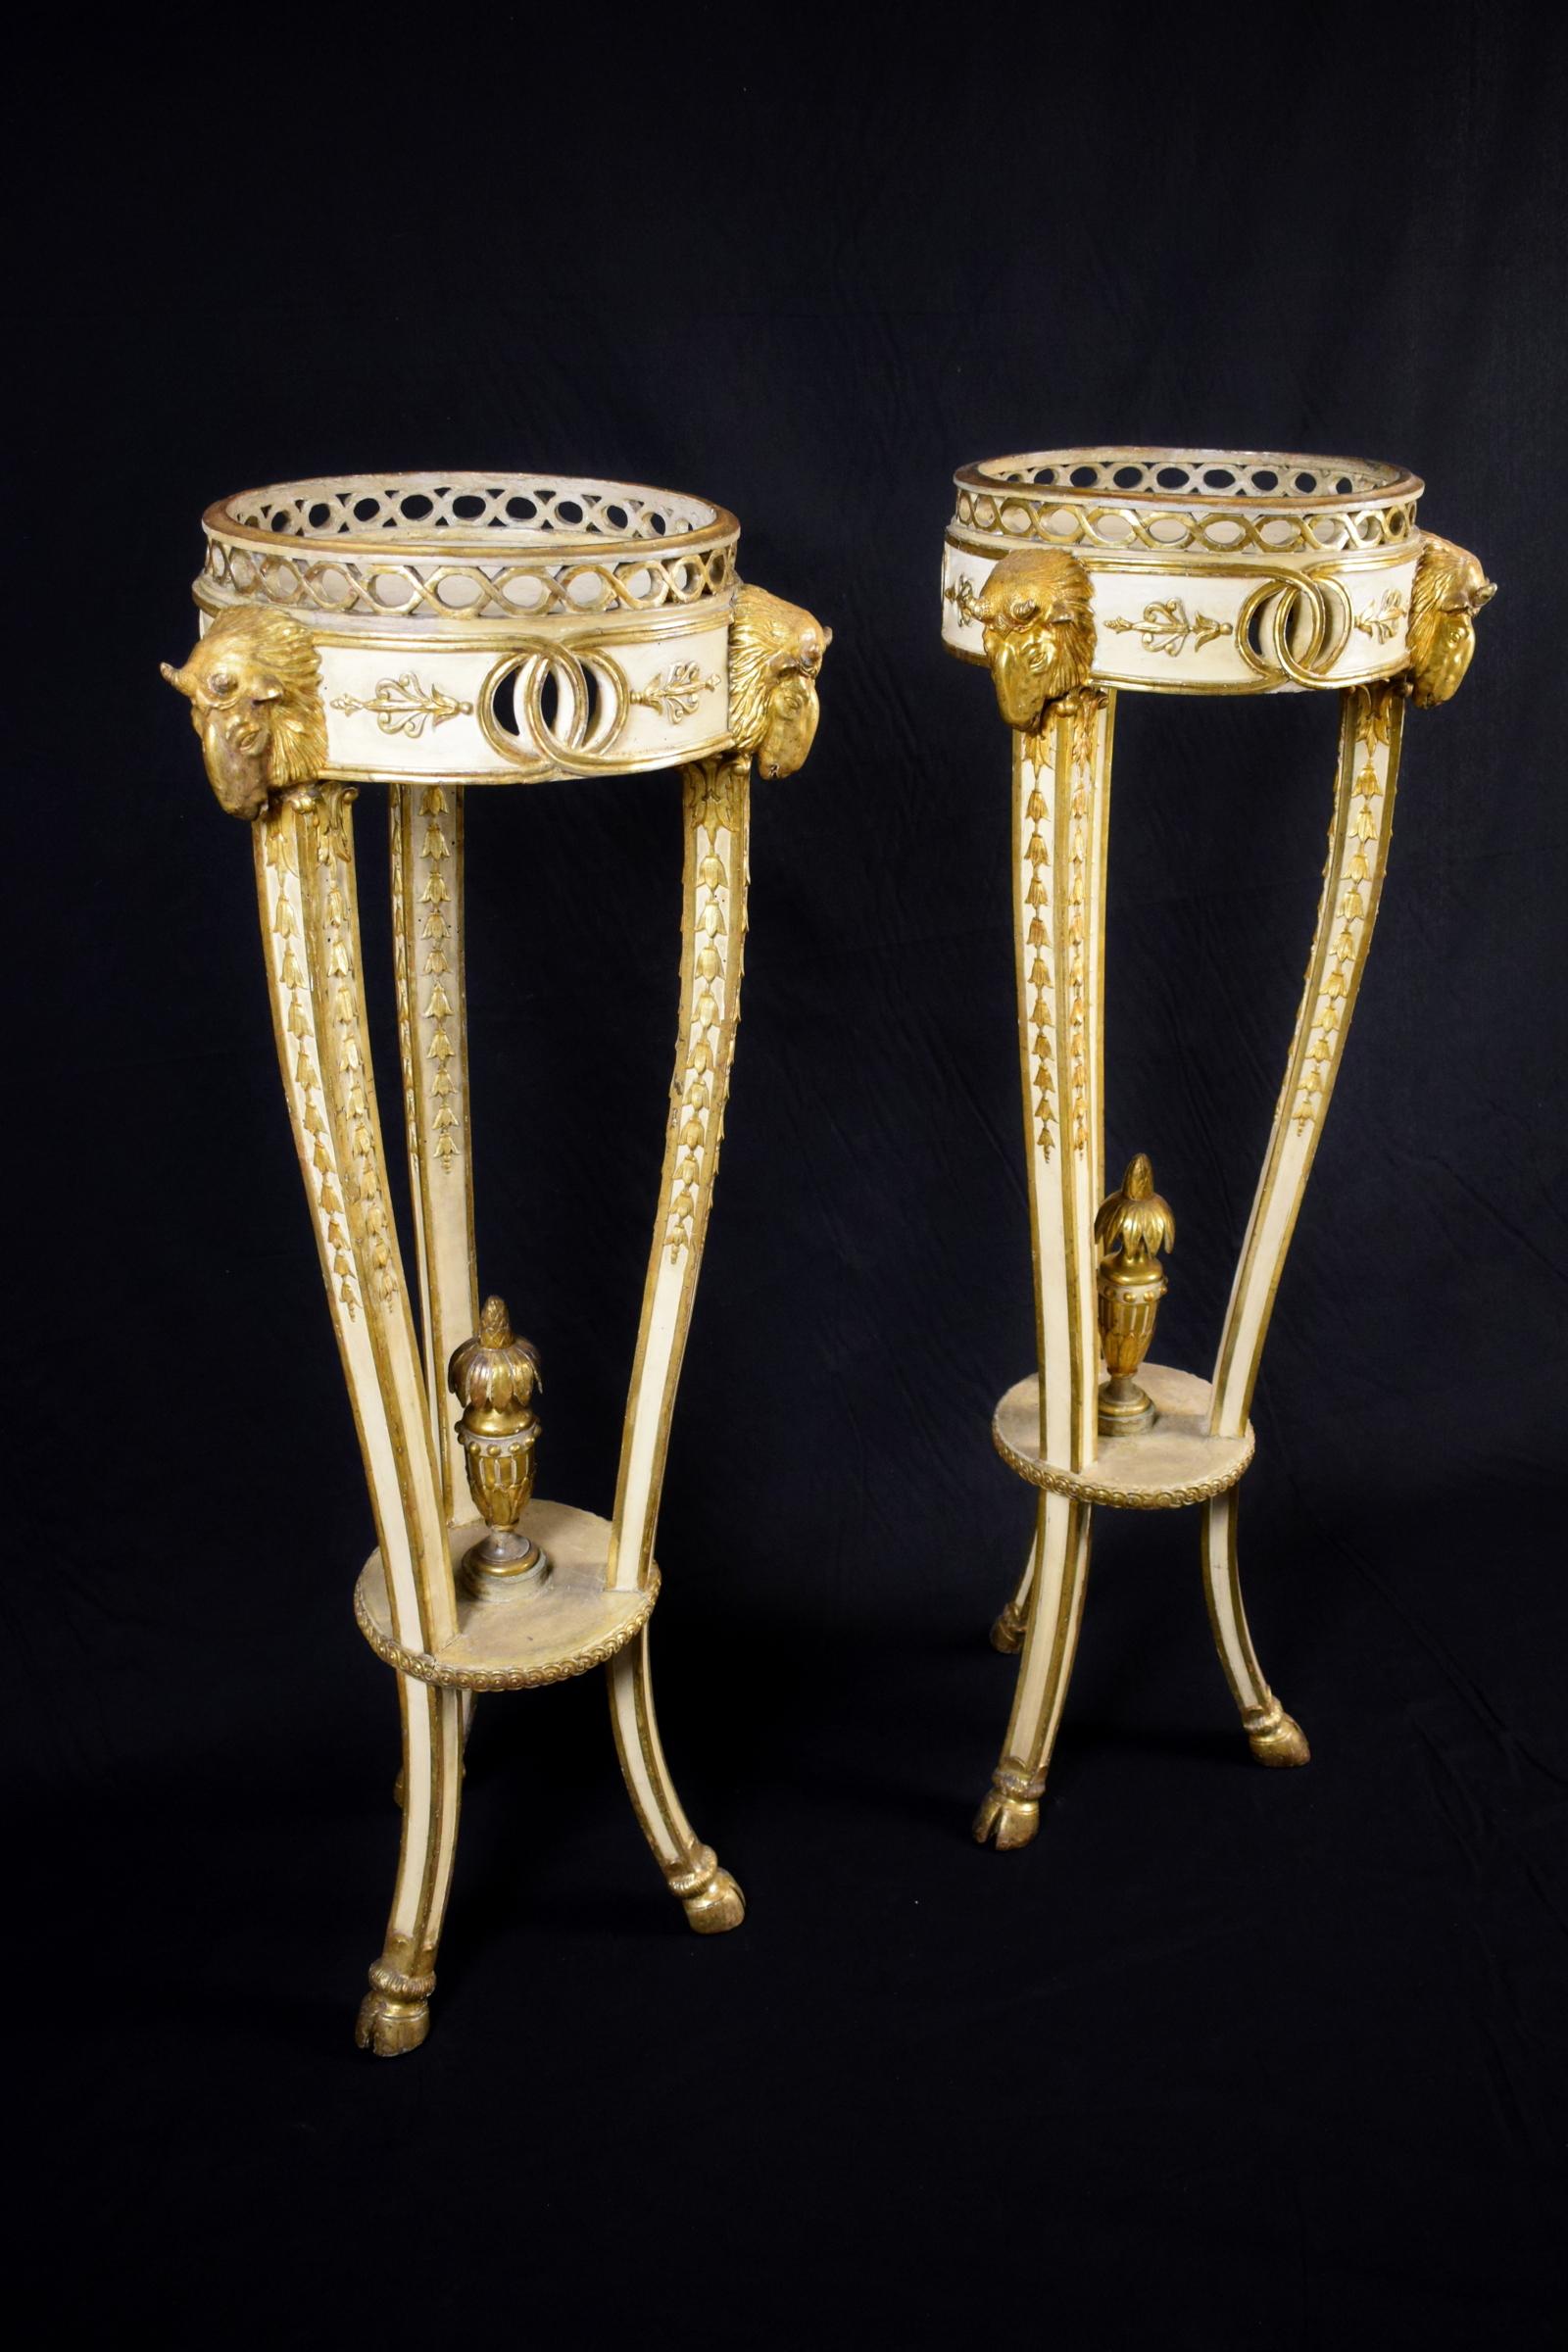 18th century, pair of Italian neoclassical lacquered and giltwood gueridon 
Measurements: height 126 x max diameter 44 cm; diameter at the top 33 cm

This fine pair of guéridon was made in Italy in the late 18th century, in the neoclassical era.